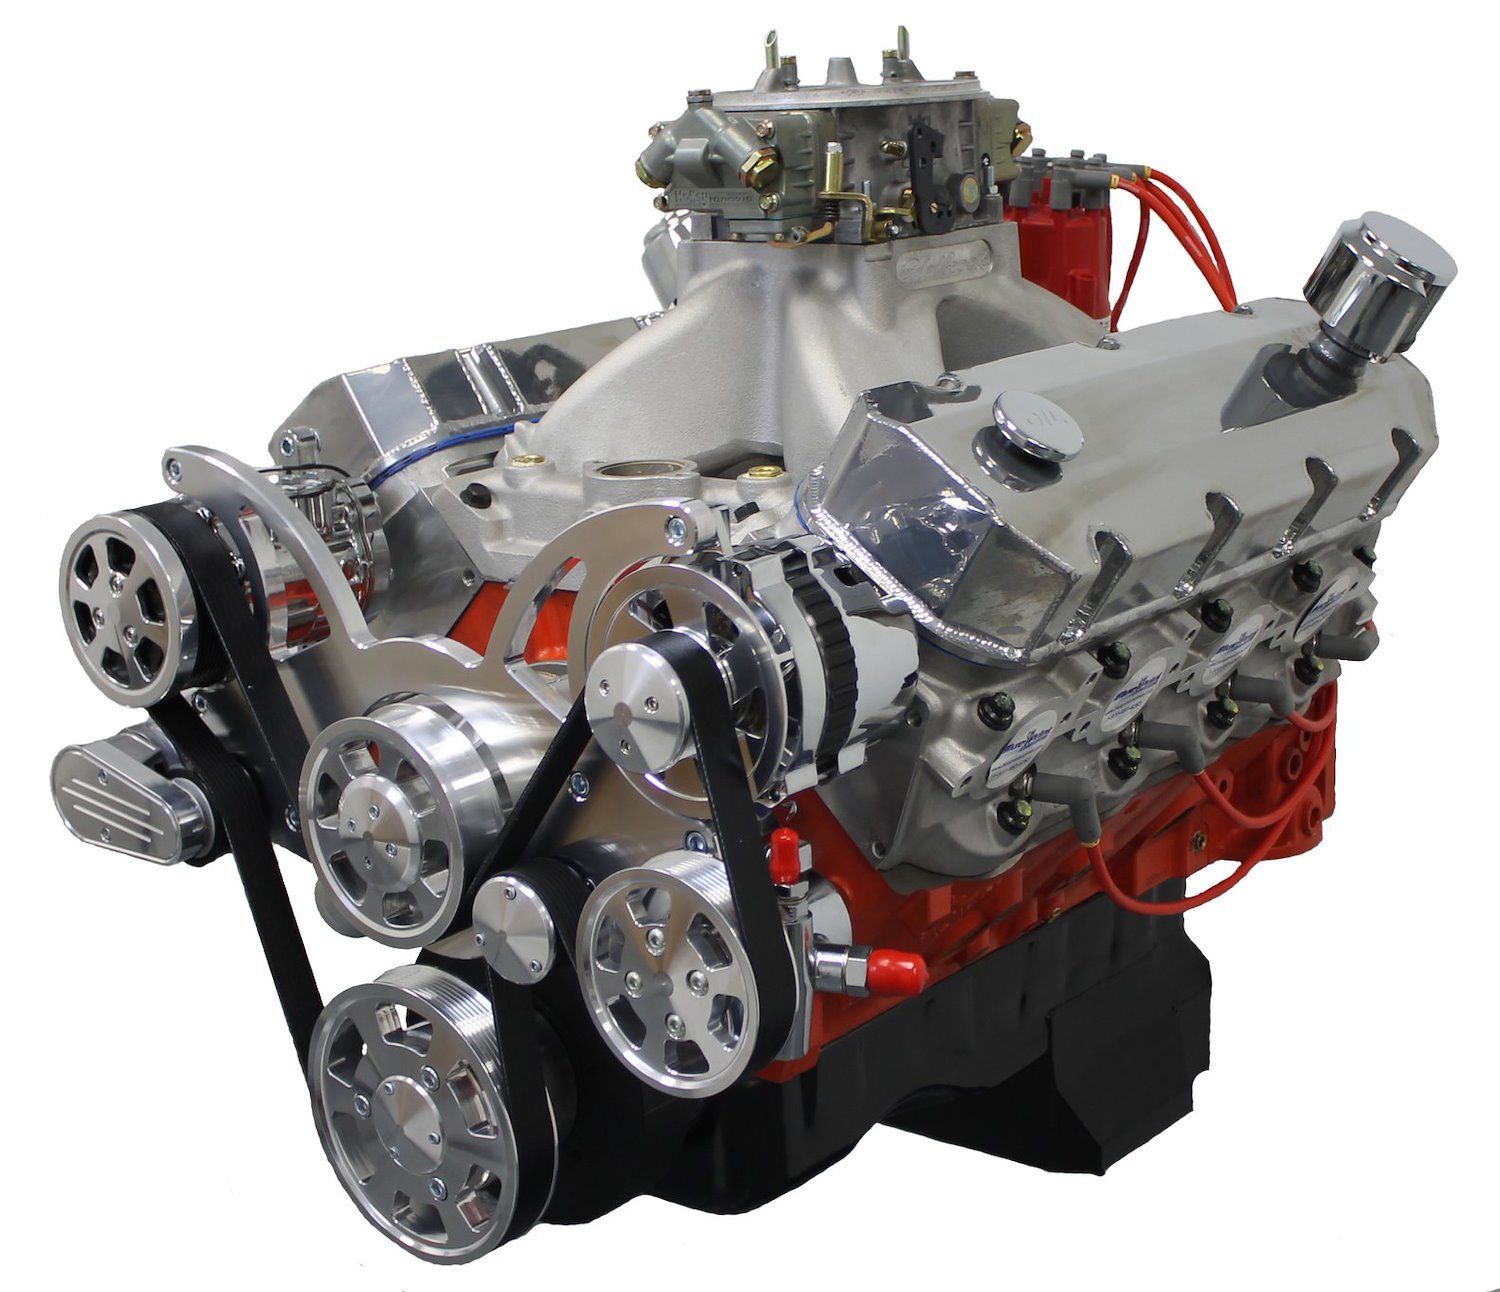 Pro Series Big Block Chevy 632 ci Drop-In Ready Crate Engine [815 HP | 775 ft.-lbs. of TQ]